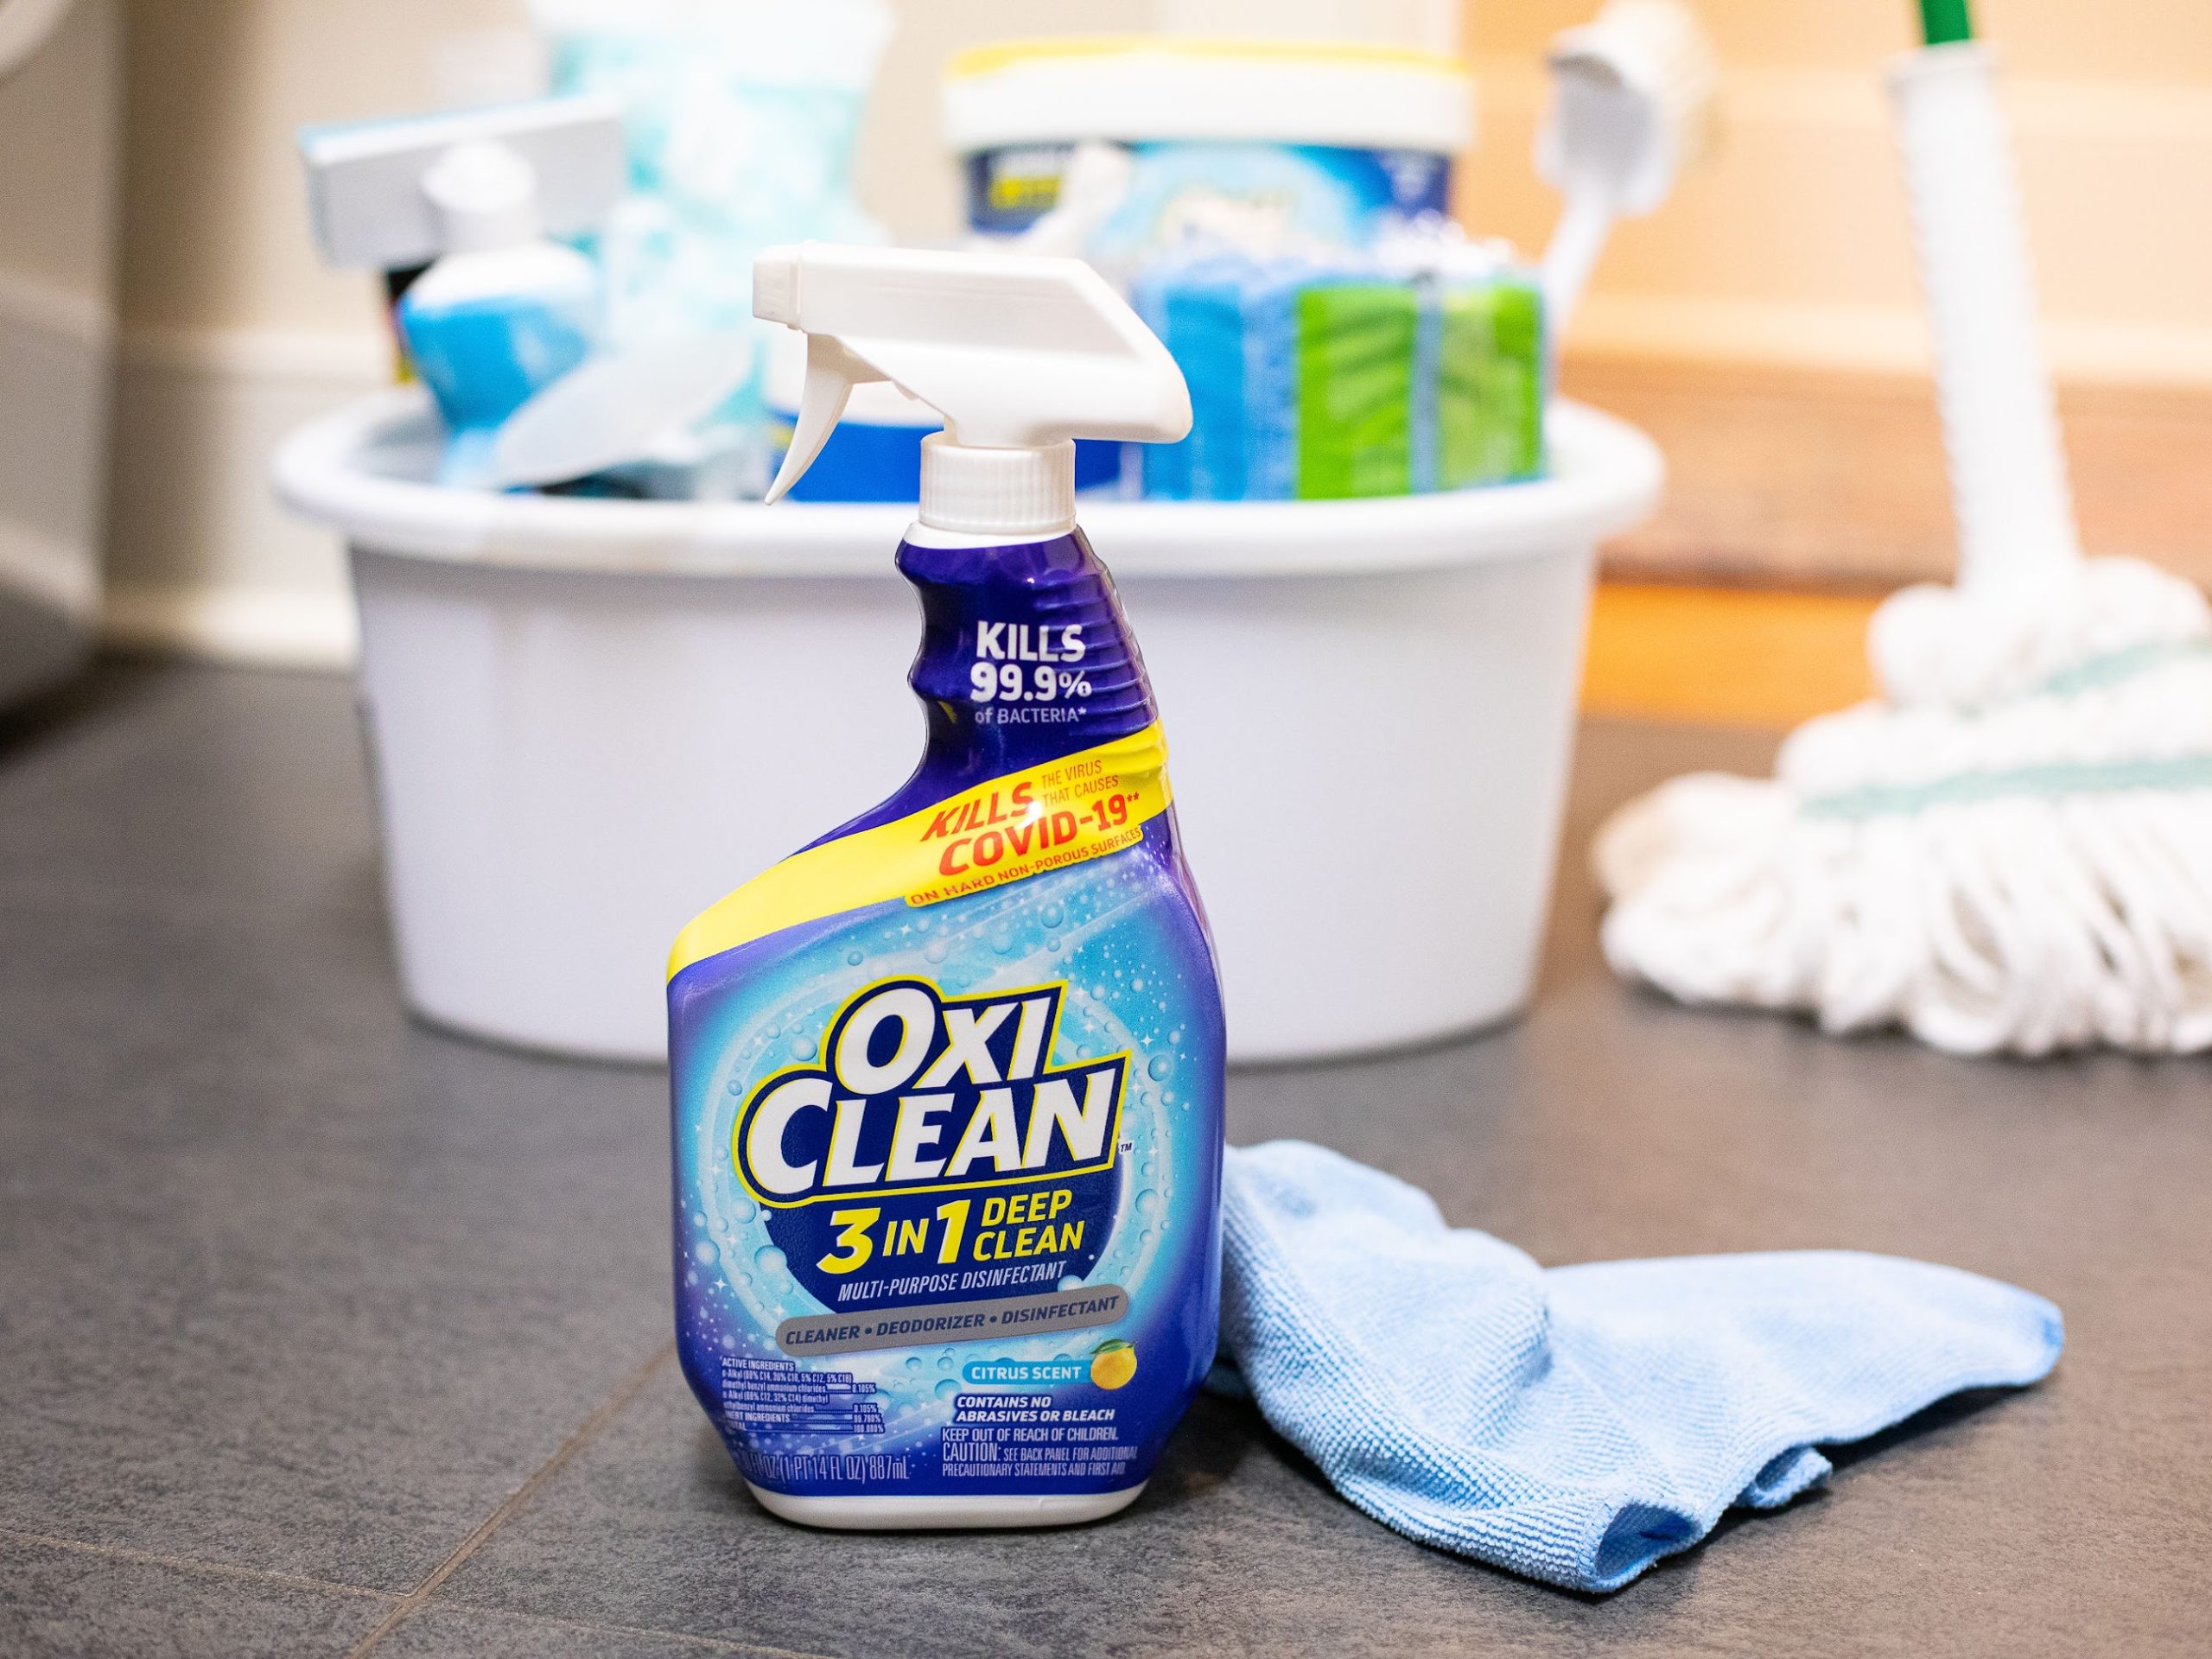 Grab Savings On OxiClean™ Multi-Purpose Disinfectant Cleaners At Publix - Clean & Disinfect Household Surfaces With The Power Of OxiClean™ on I Heart Publix